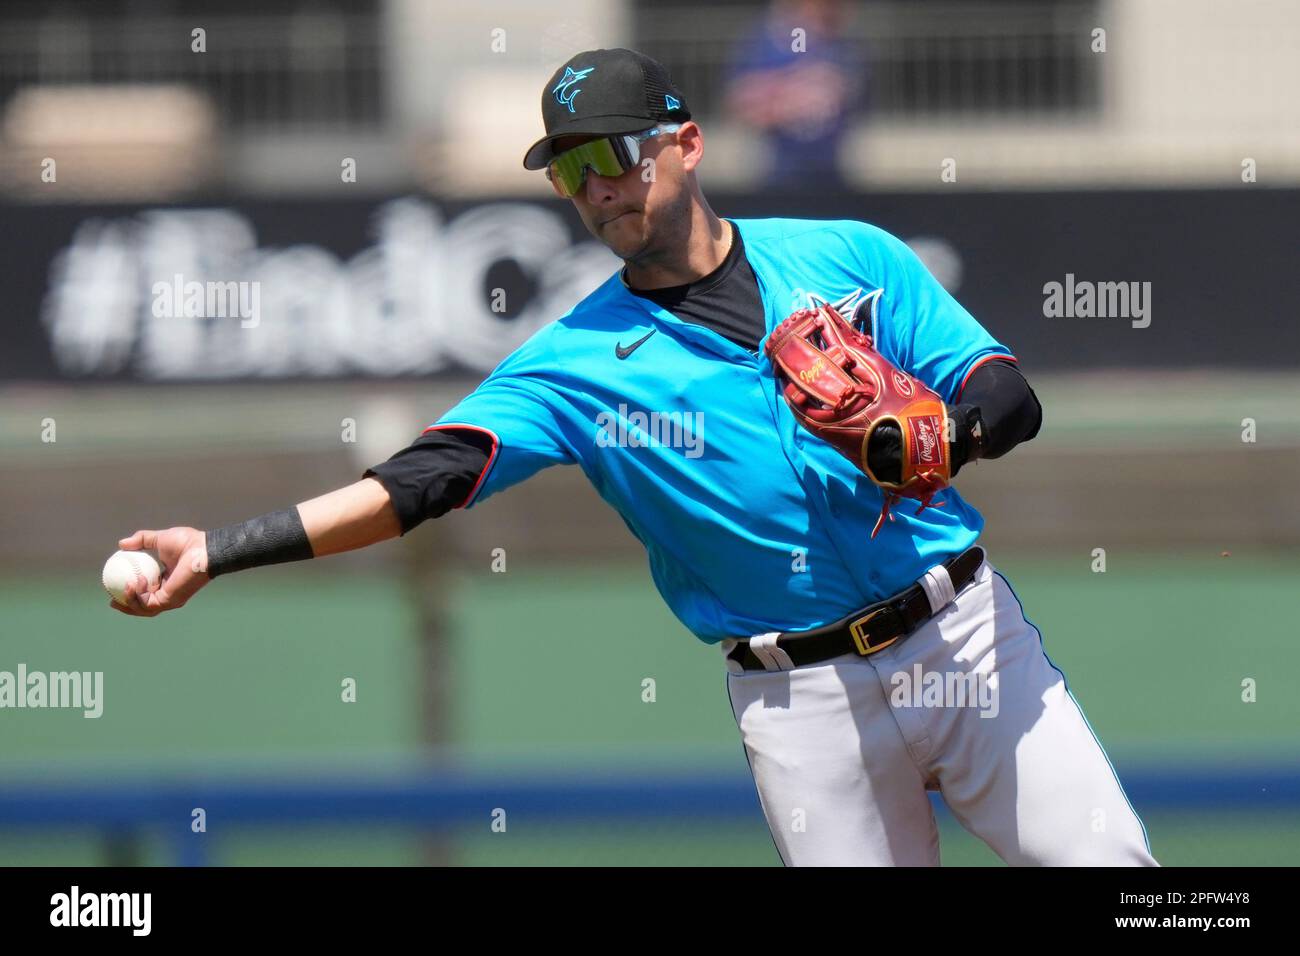 Miami Marlins shortstop Jose Iglesias throws to first during a